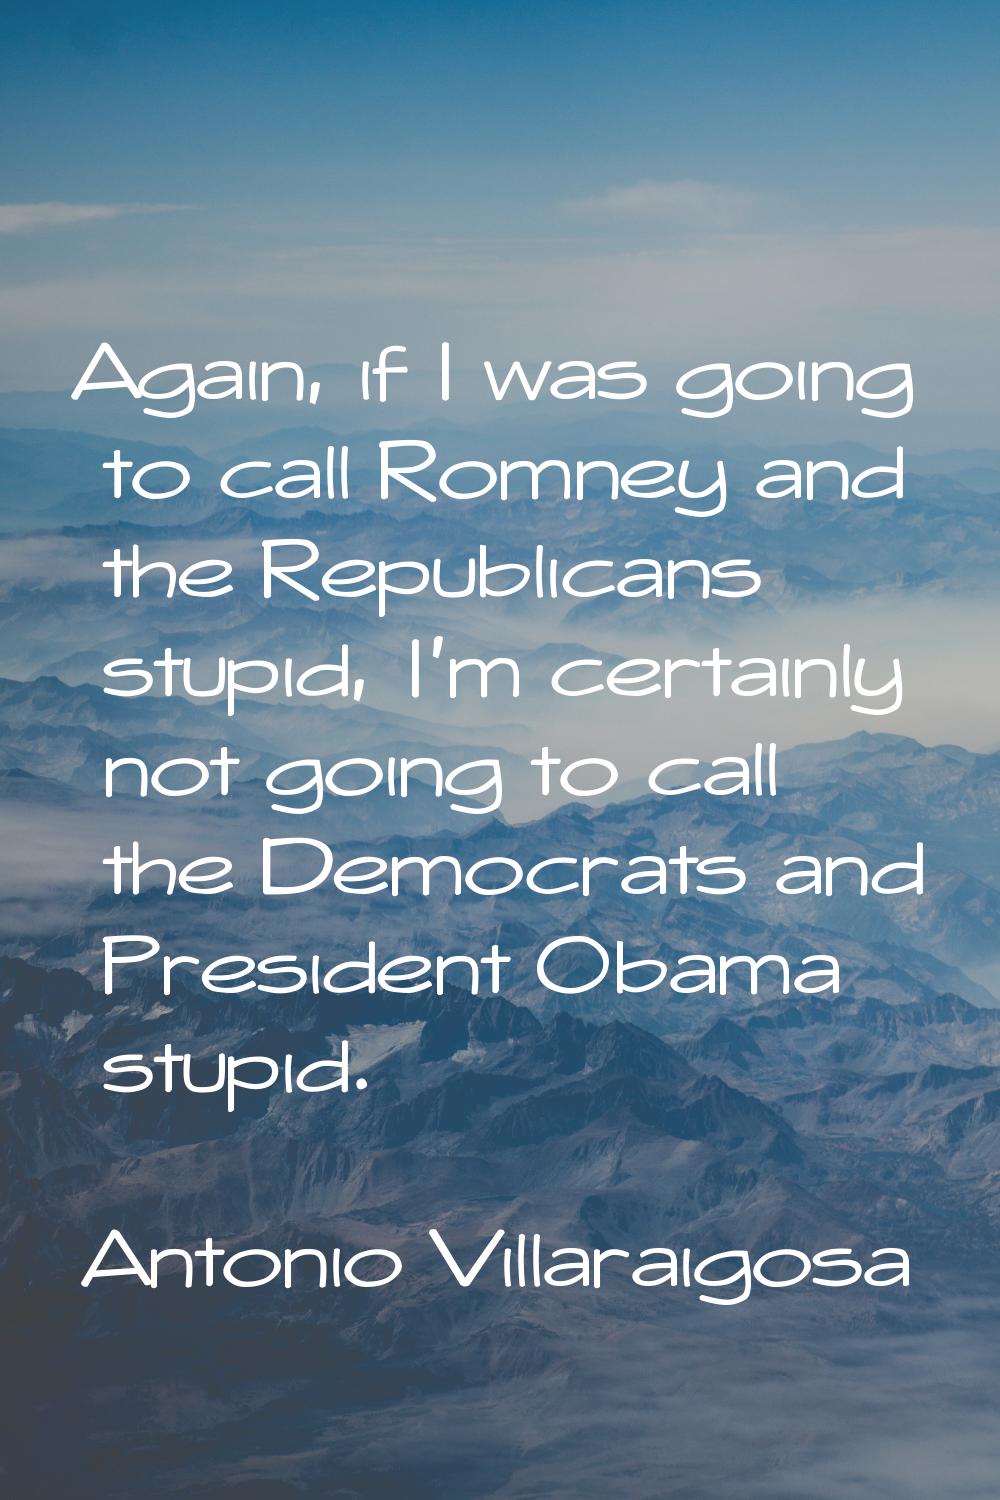 Again, if I was going to call Romney and the Republicans stupid, I'm certainly not going to call th